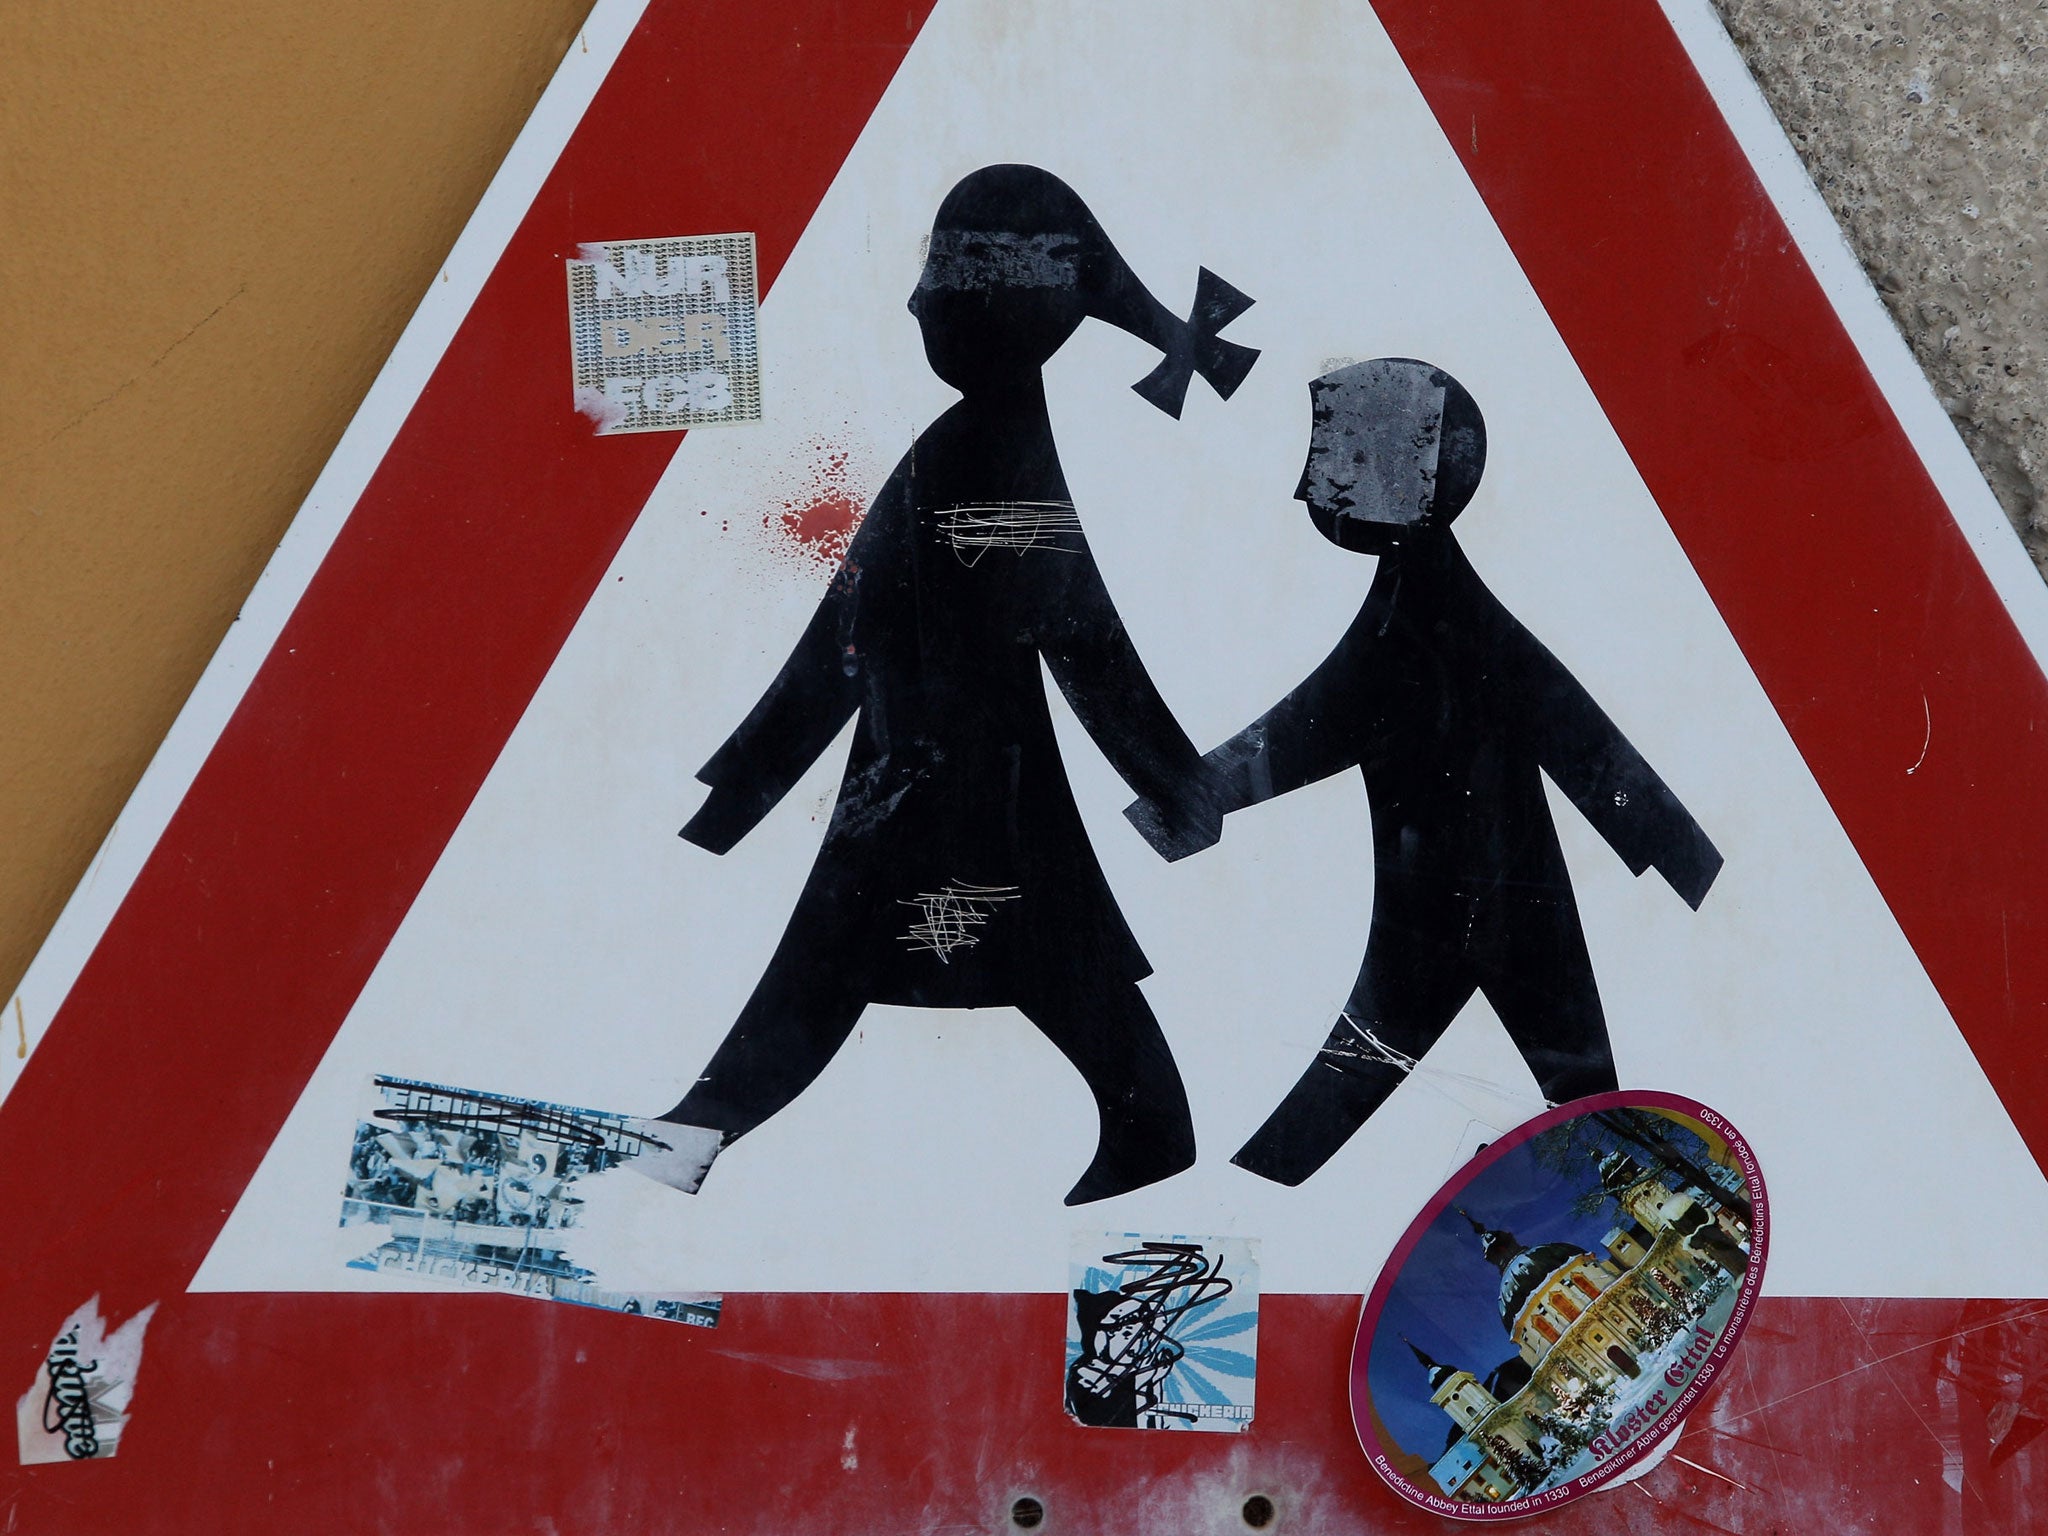 A traffic sign depicting children is pictured at the Benedictine-run Ettal Monastery is pictured on March 12, 2010 in Ettal, Germany.